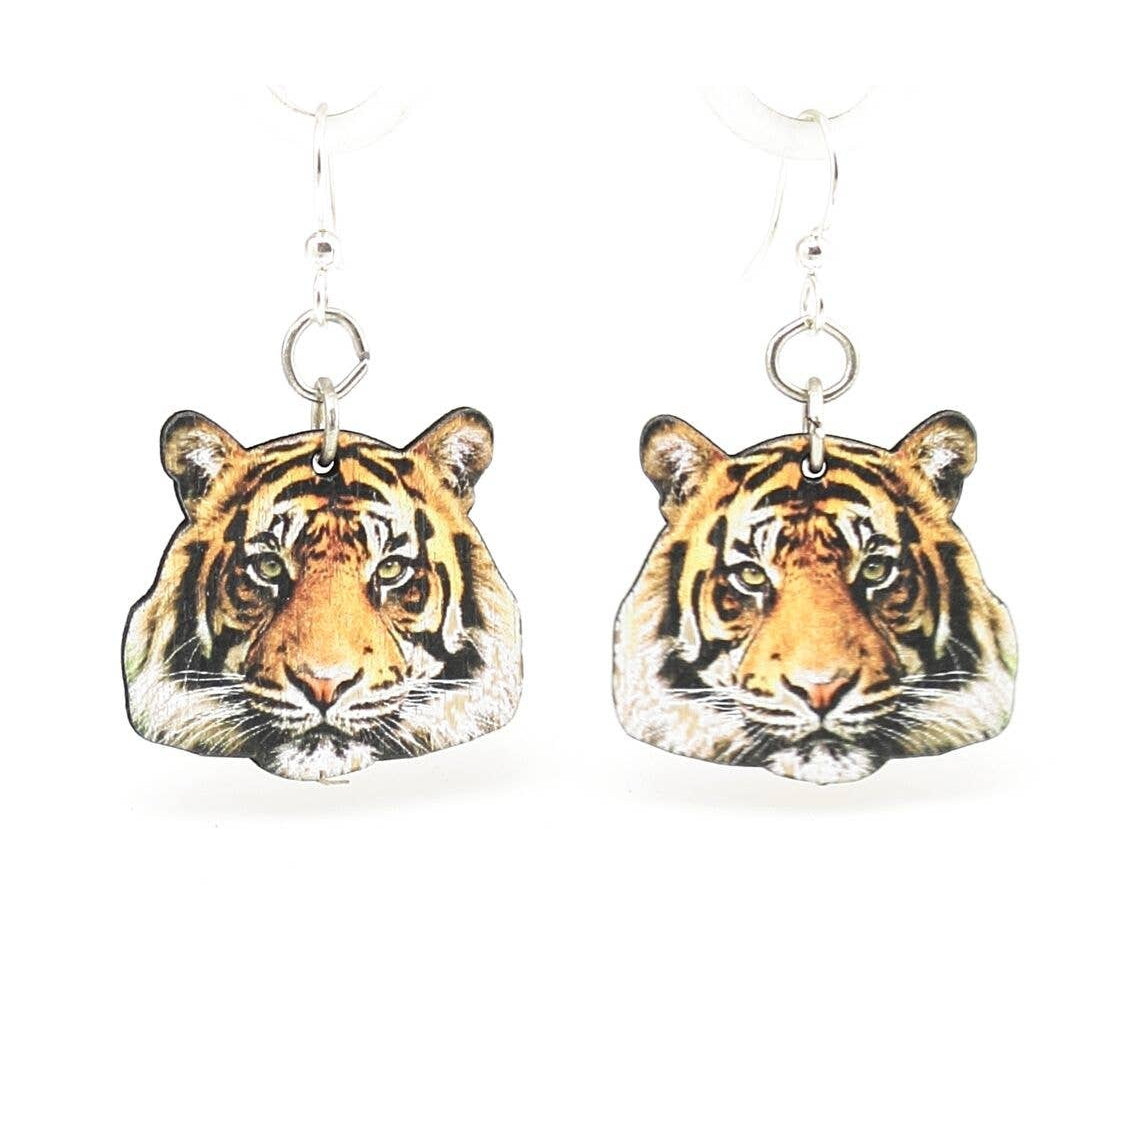 Full Color Tiger Silver Finish Hook Earrings | Lightweight Laser Cut Wood with Hypoallergenic Ear Wires | Handmade in USA